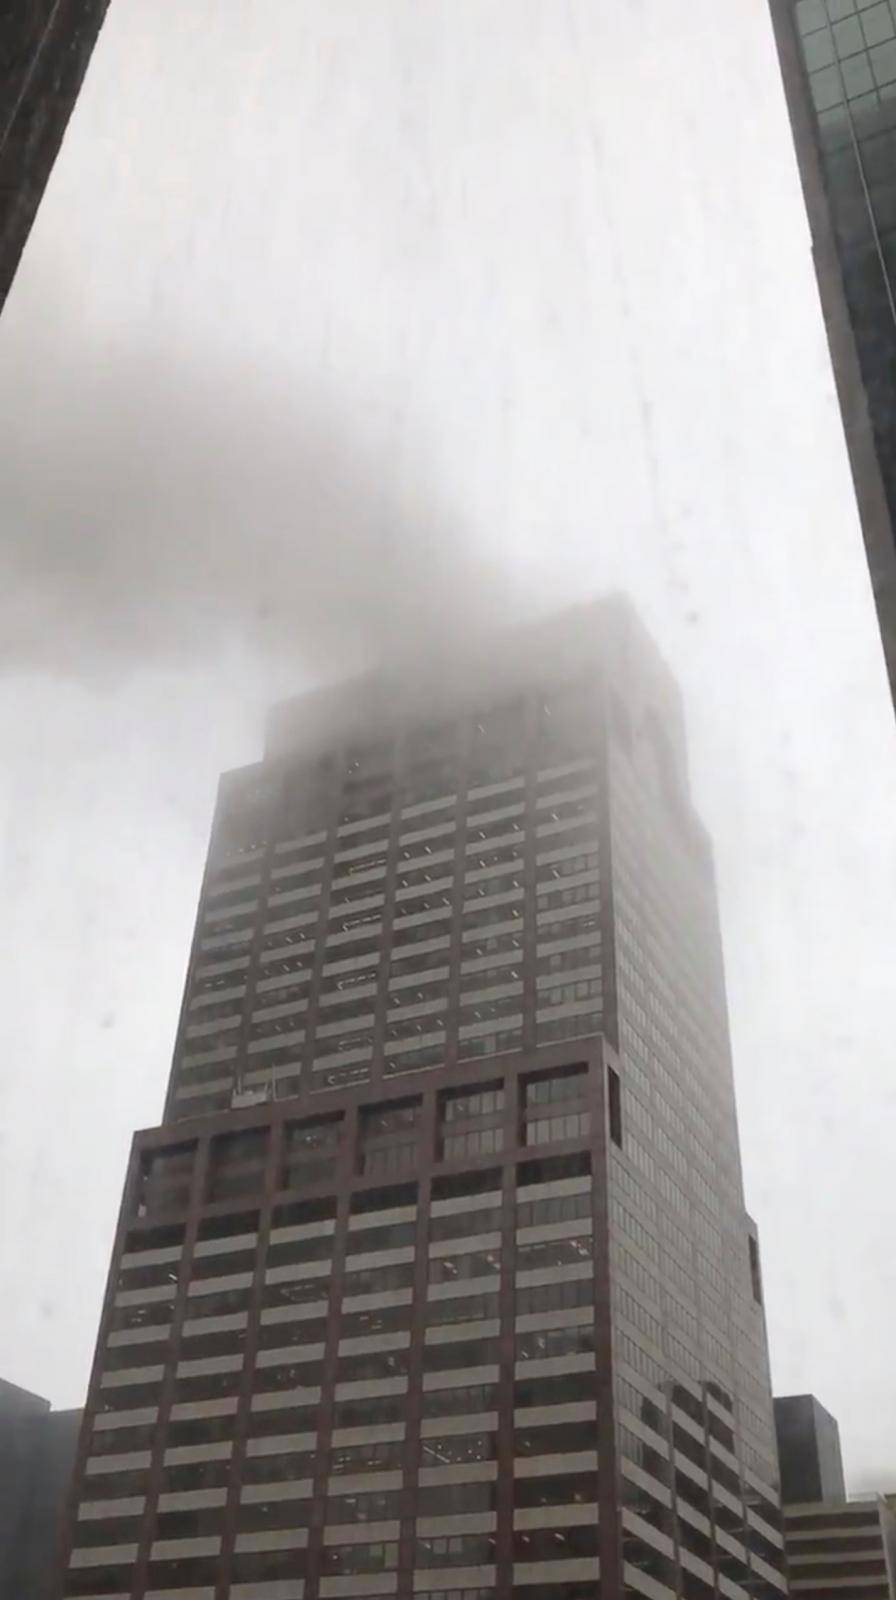 Smoke is seen rising from a building after a helicopter crash in New York City